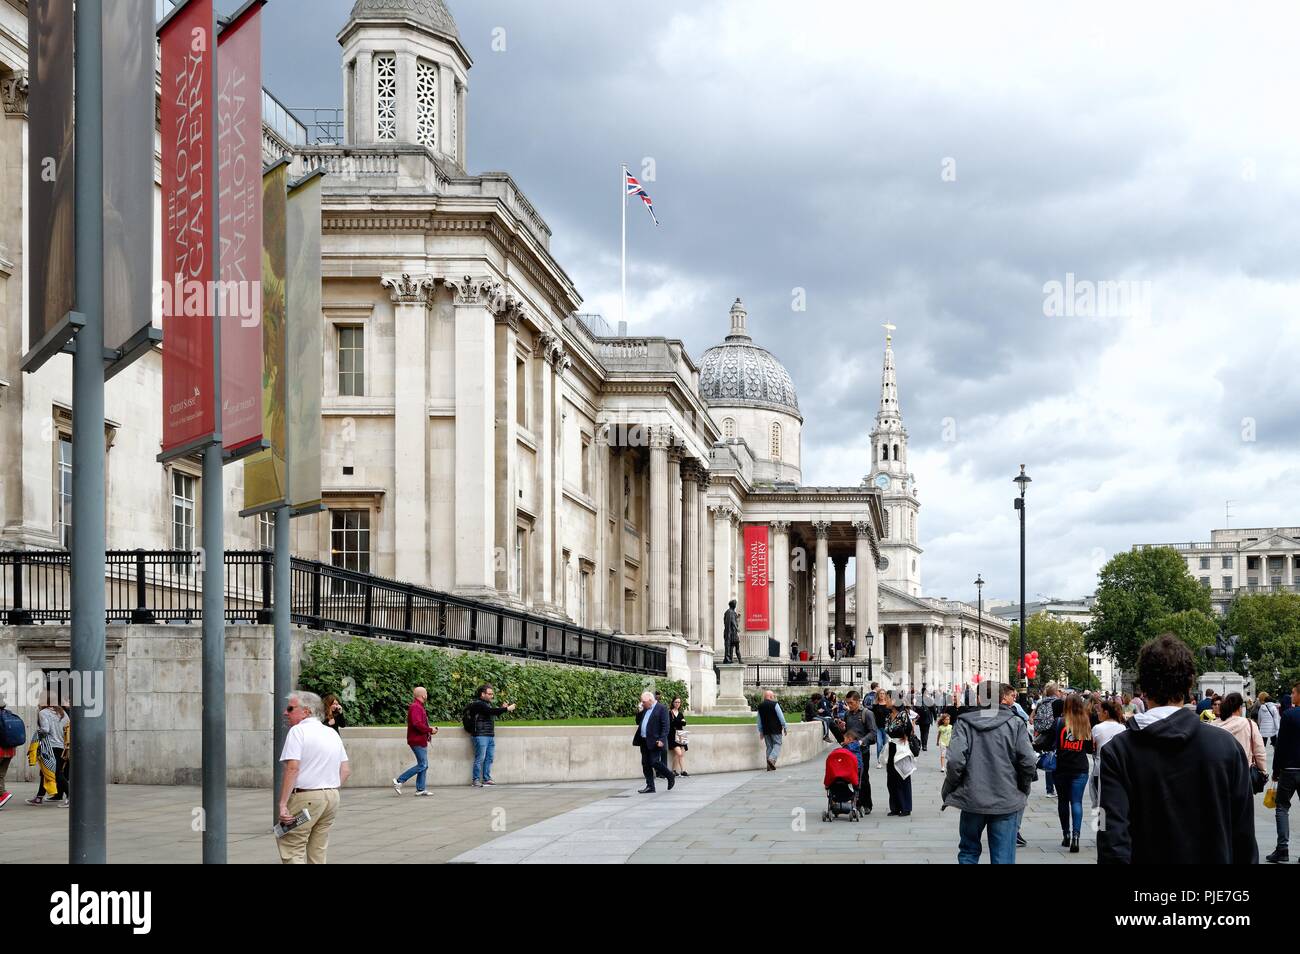 Exterior of the National Gallery,Trafalgar Square, Central London England UK Stock Photo